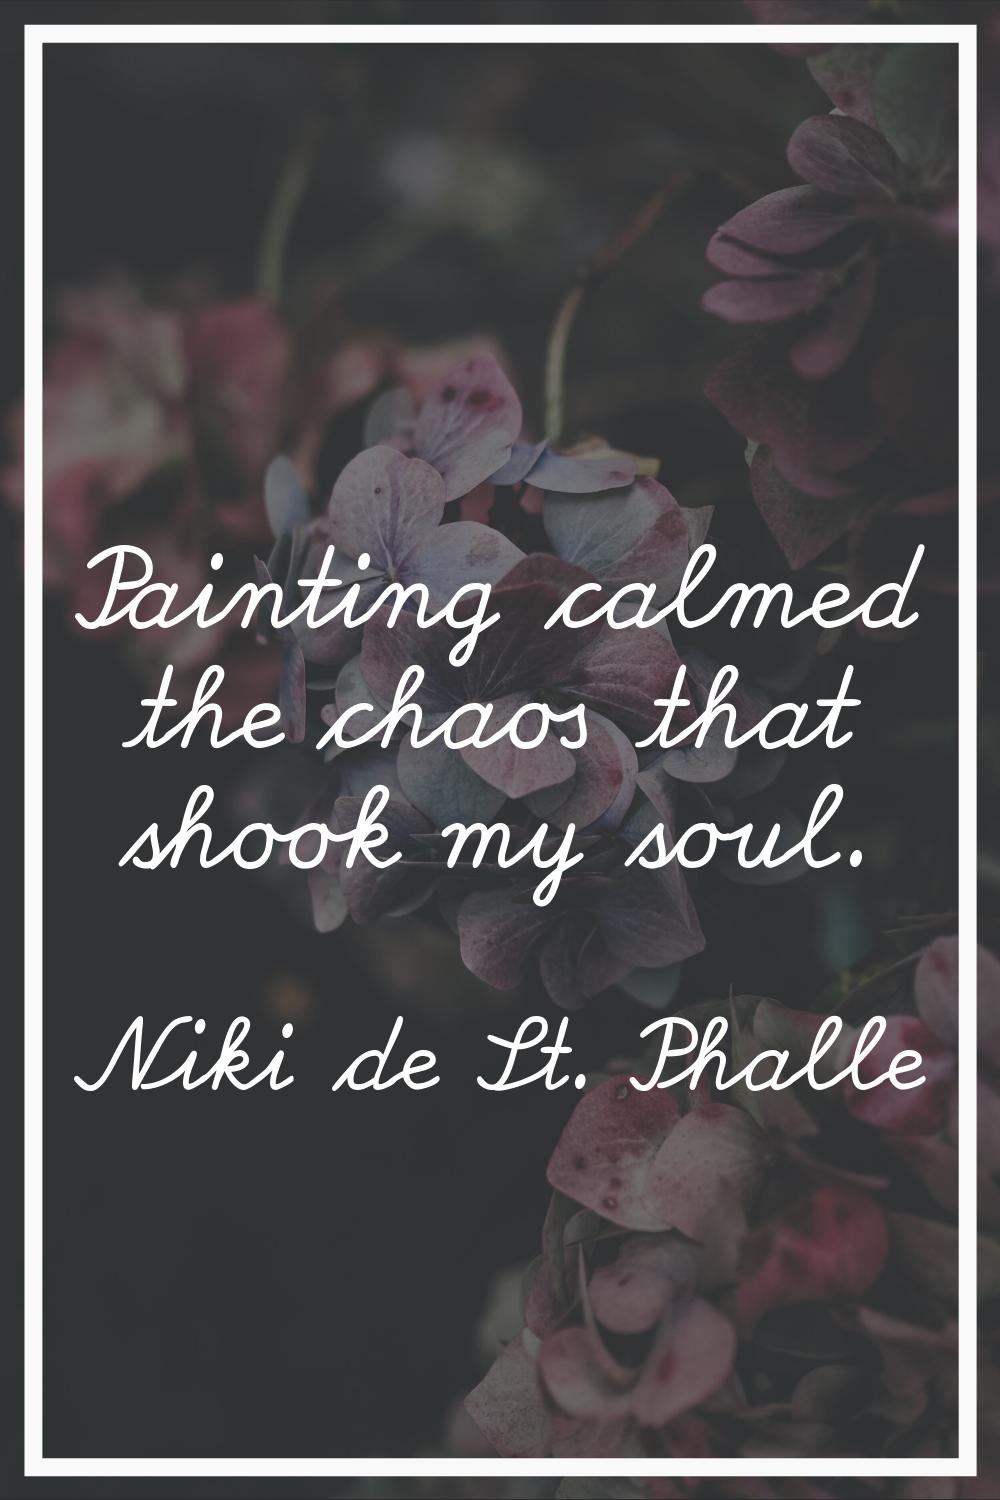 Painting calmed the chaos that shook my soul.